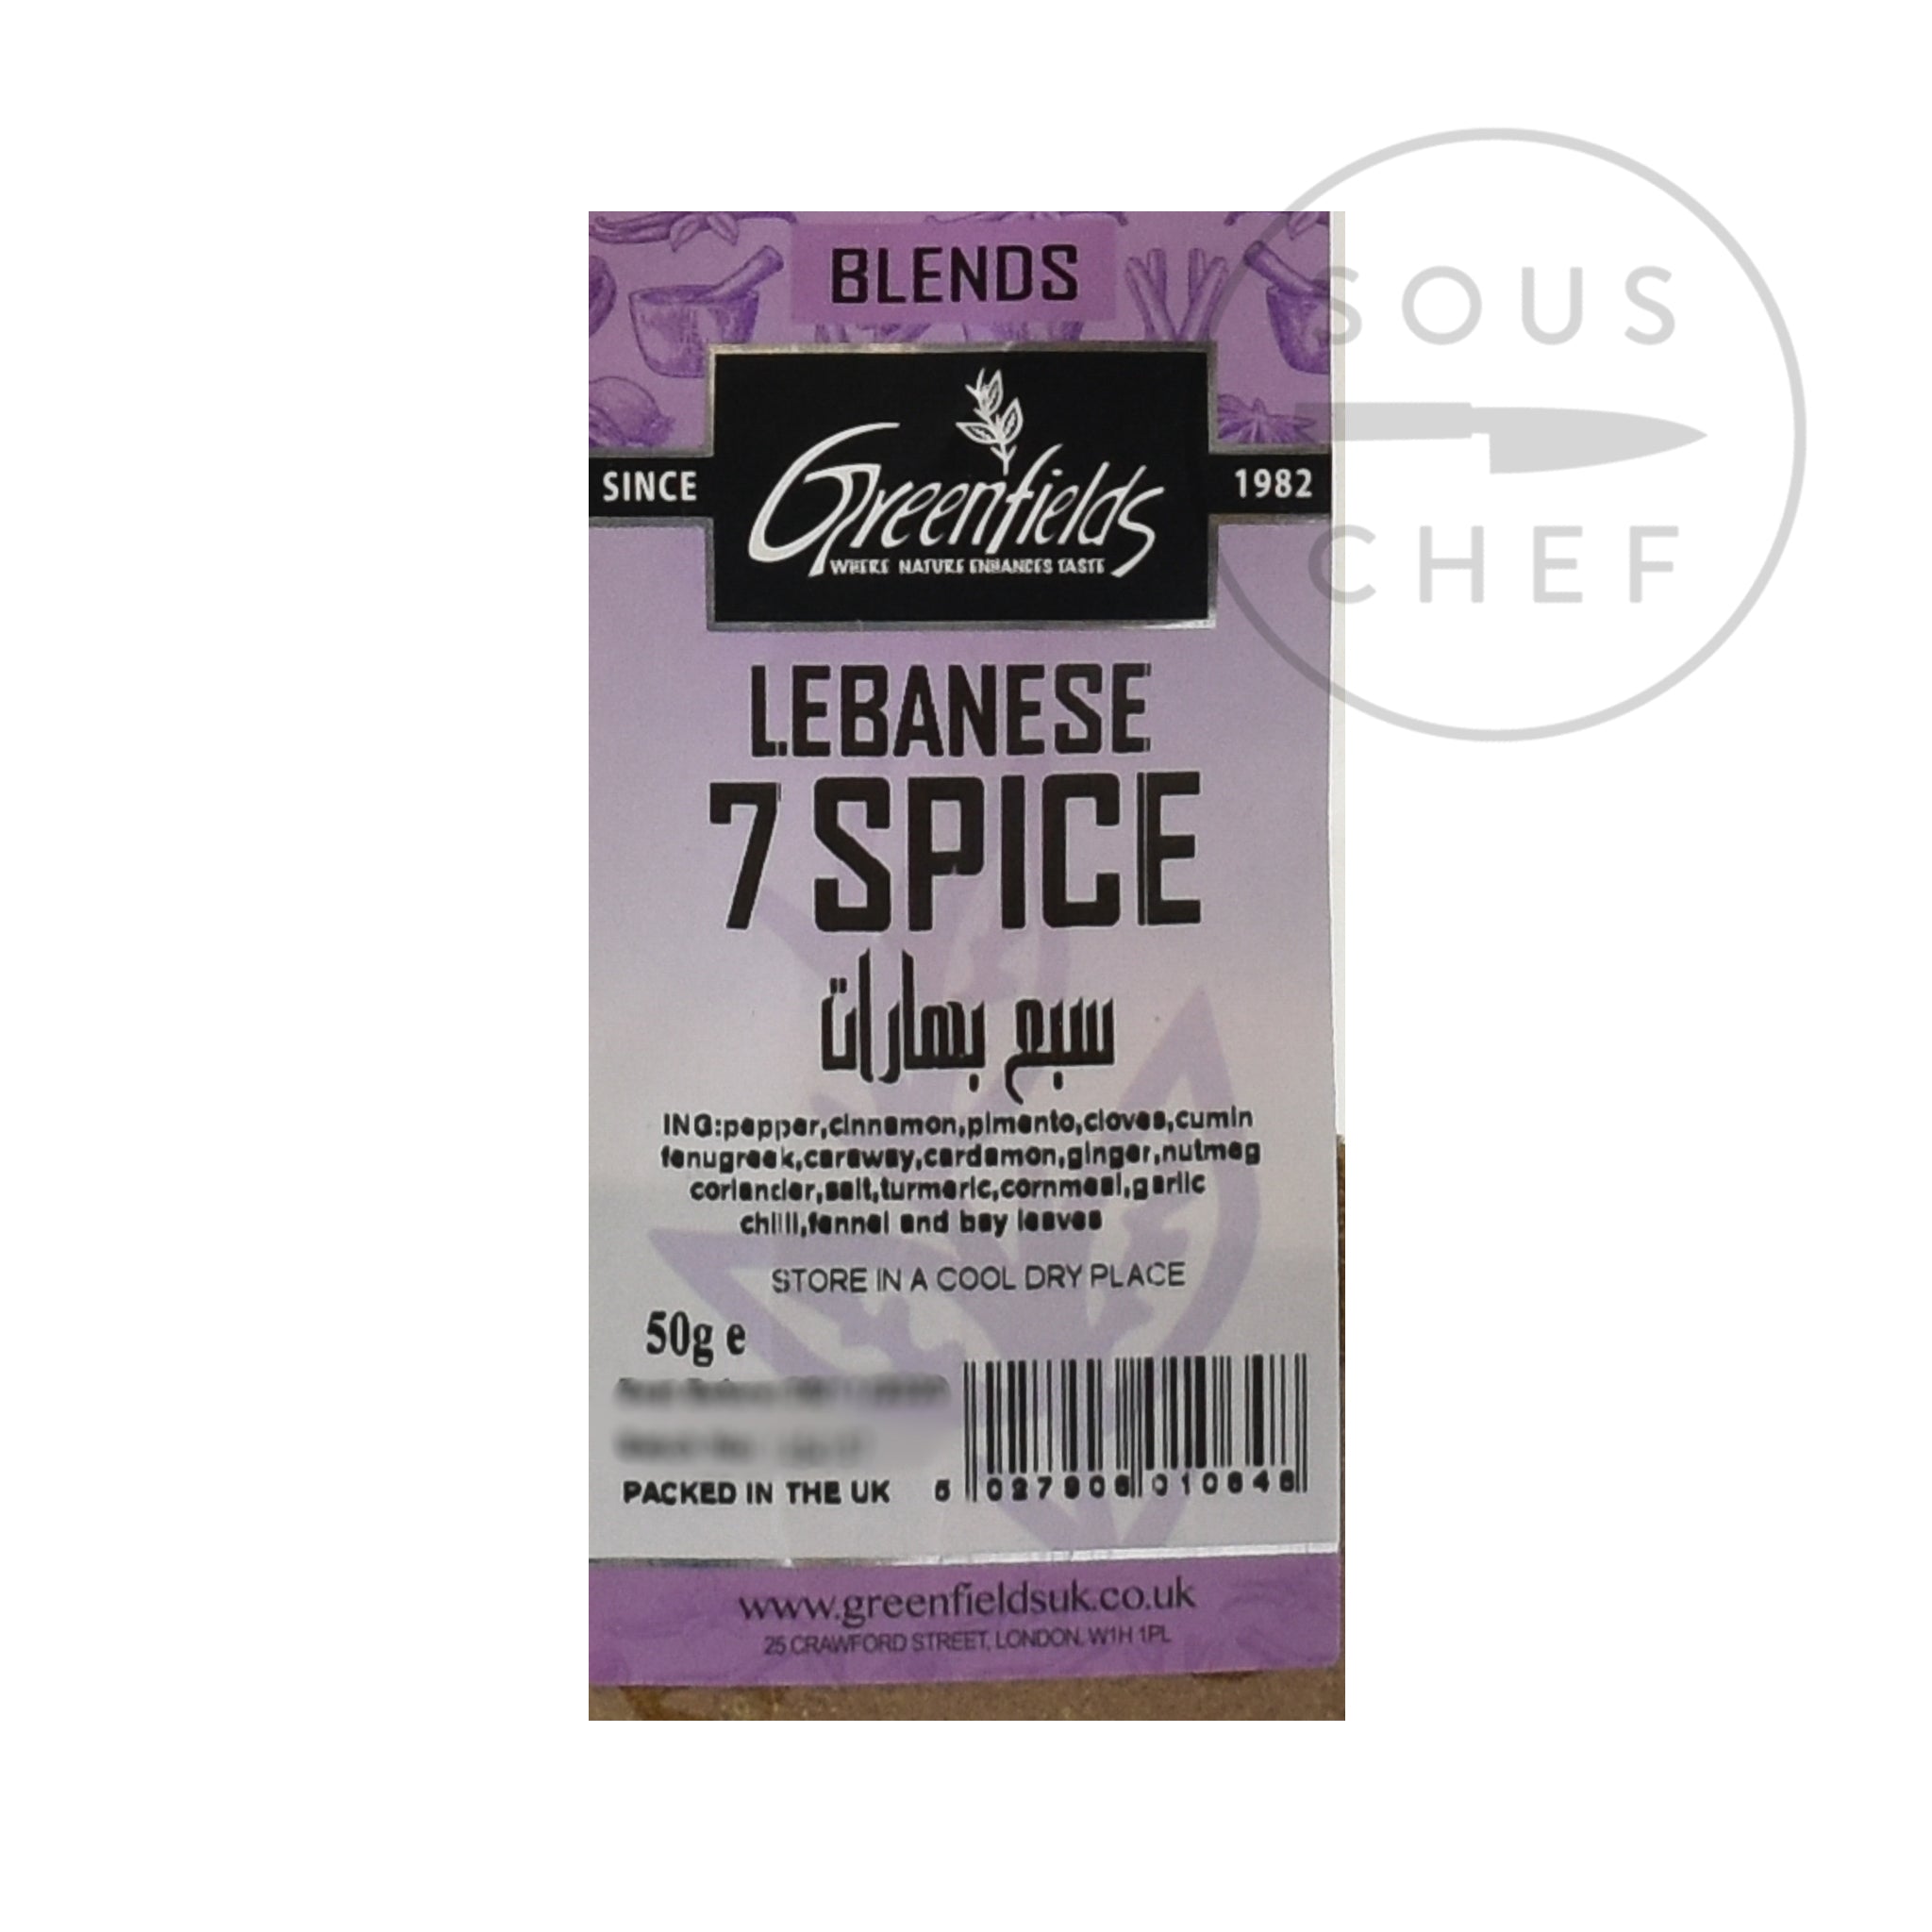 Lebanese Seven Spice Mix ingredients